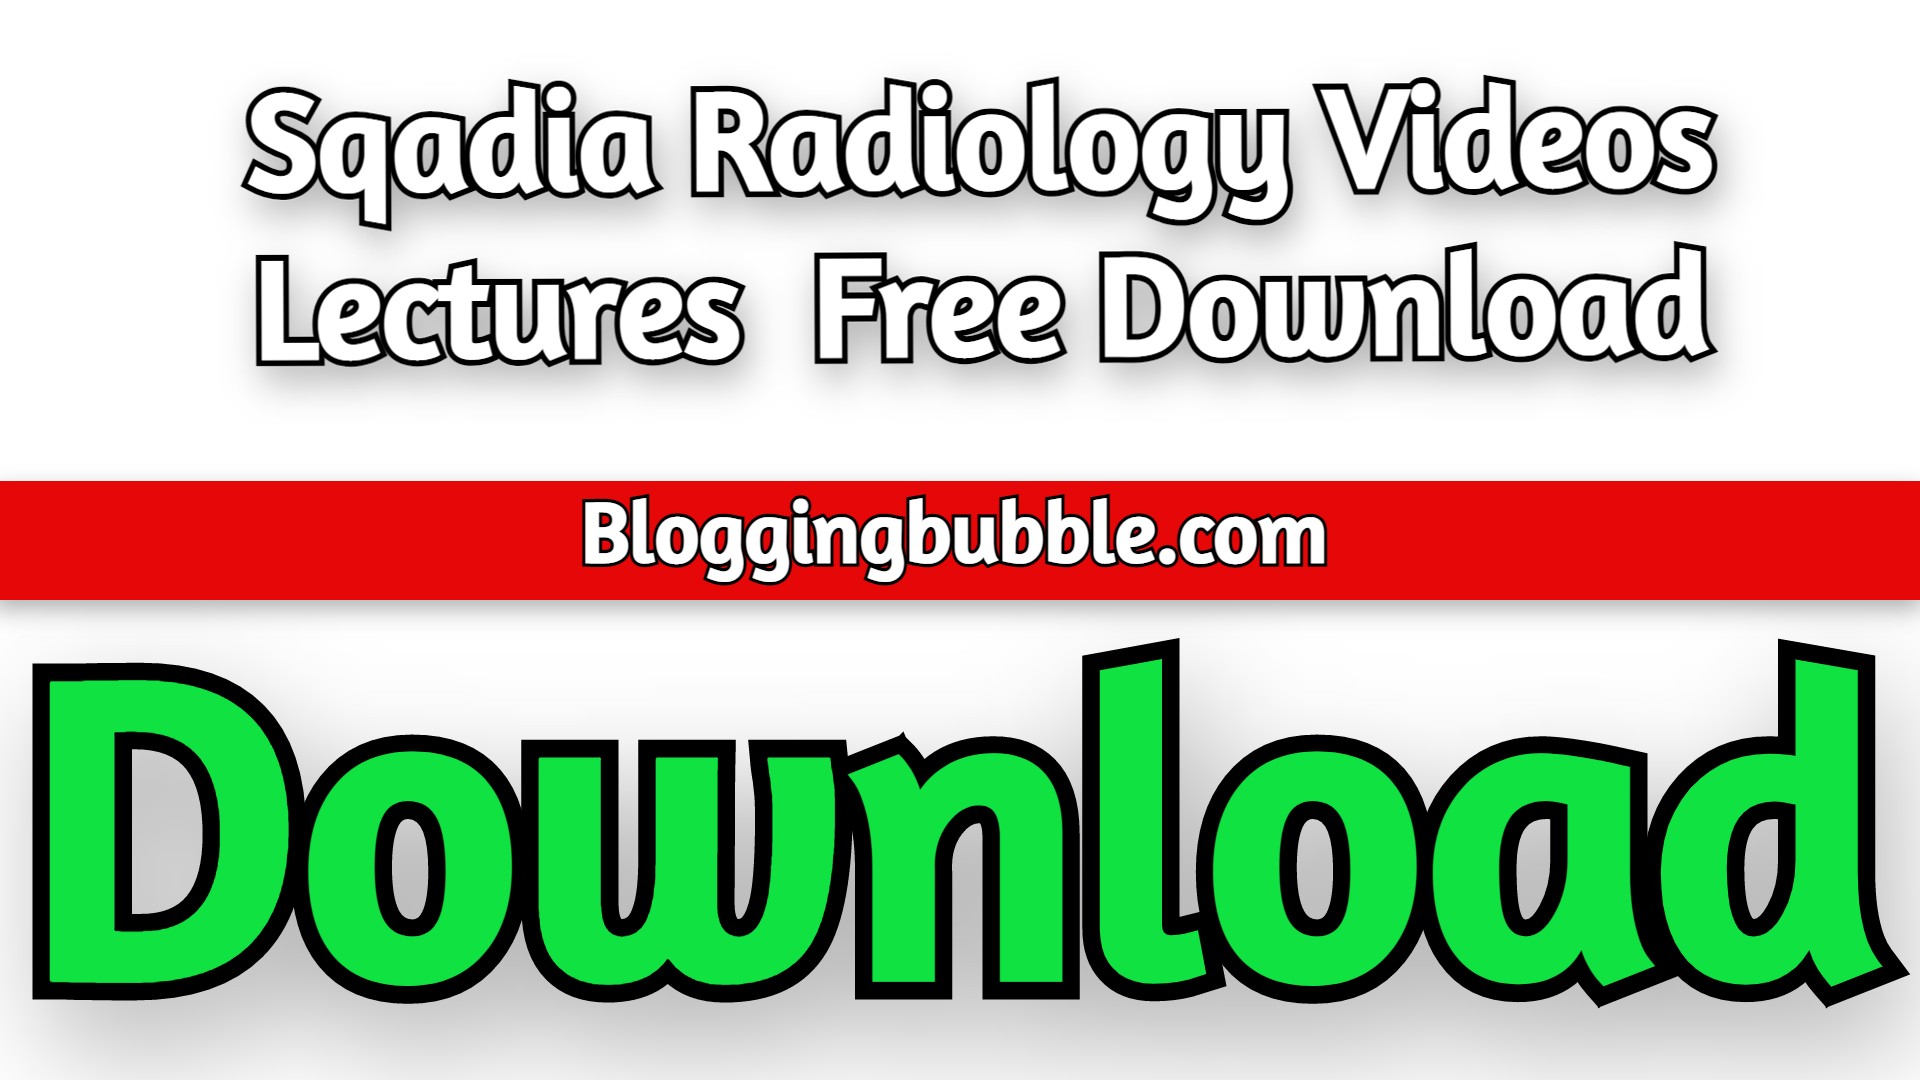 Sqadia Radiology Videos Lectures 2022 Free Download